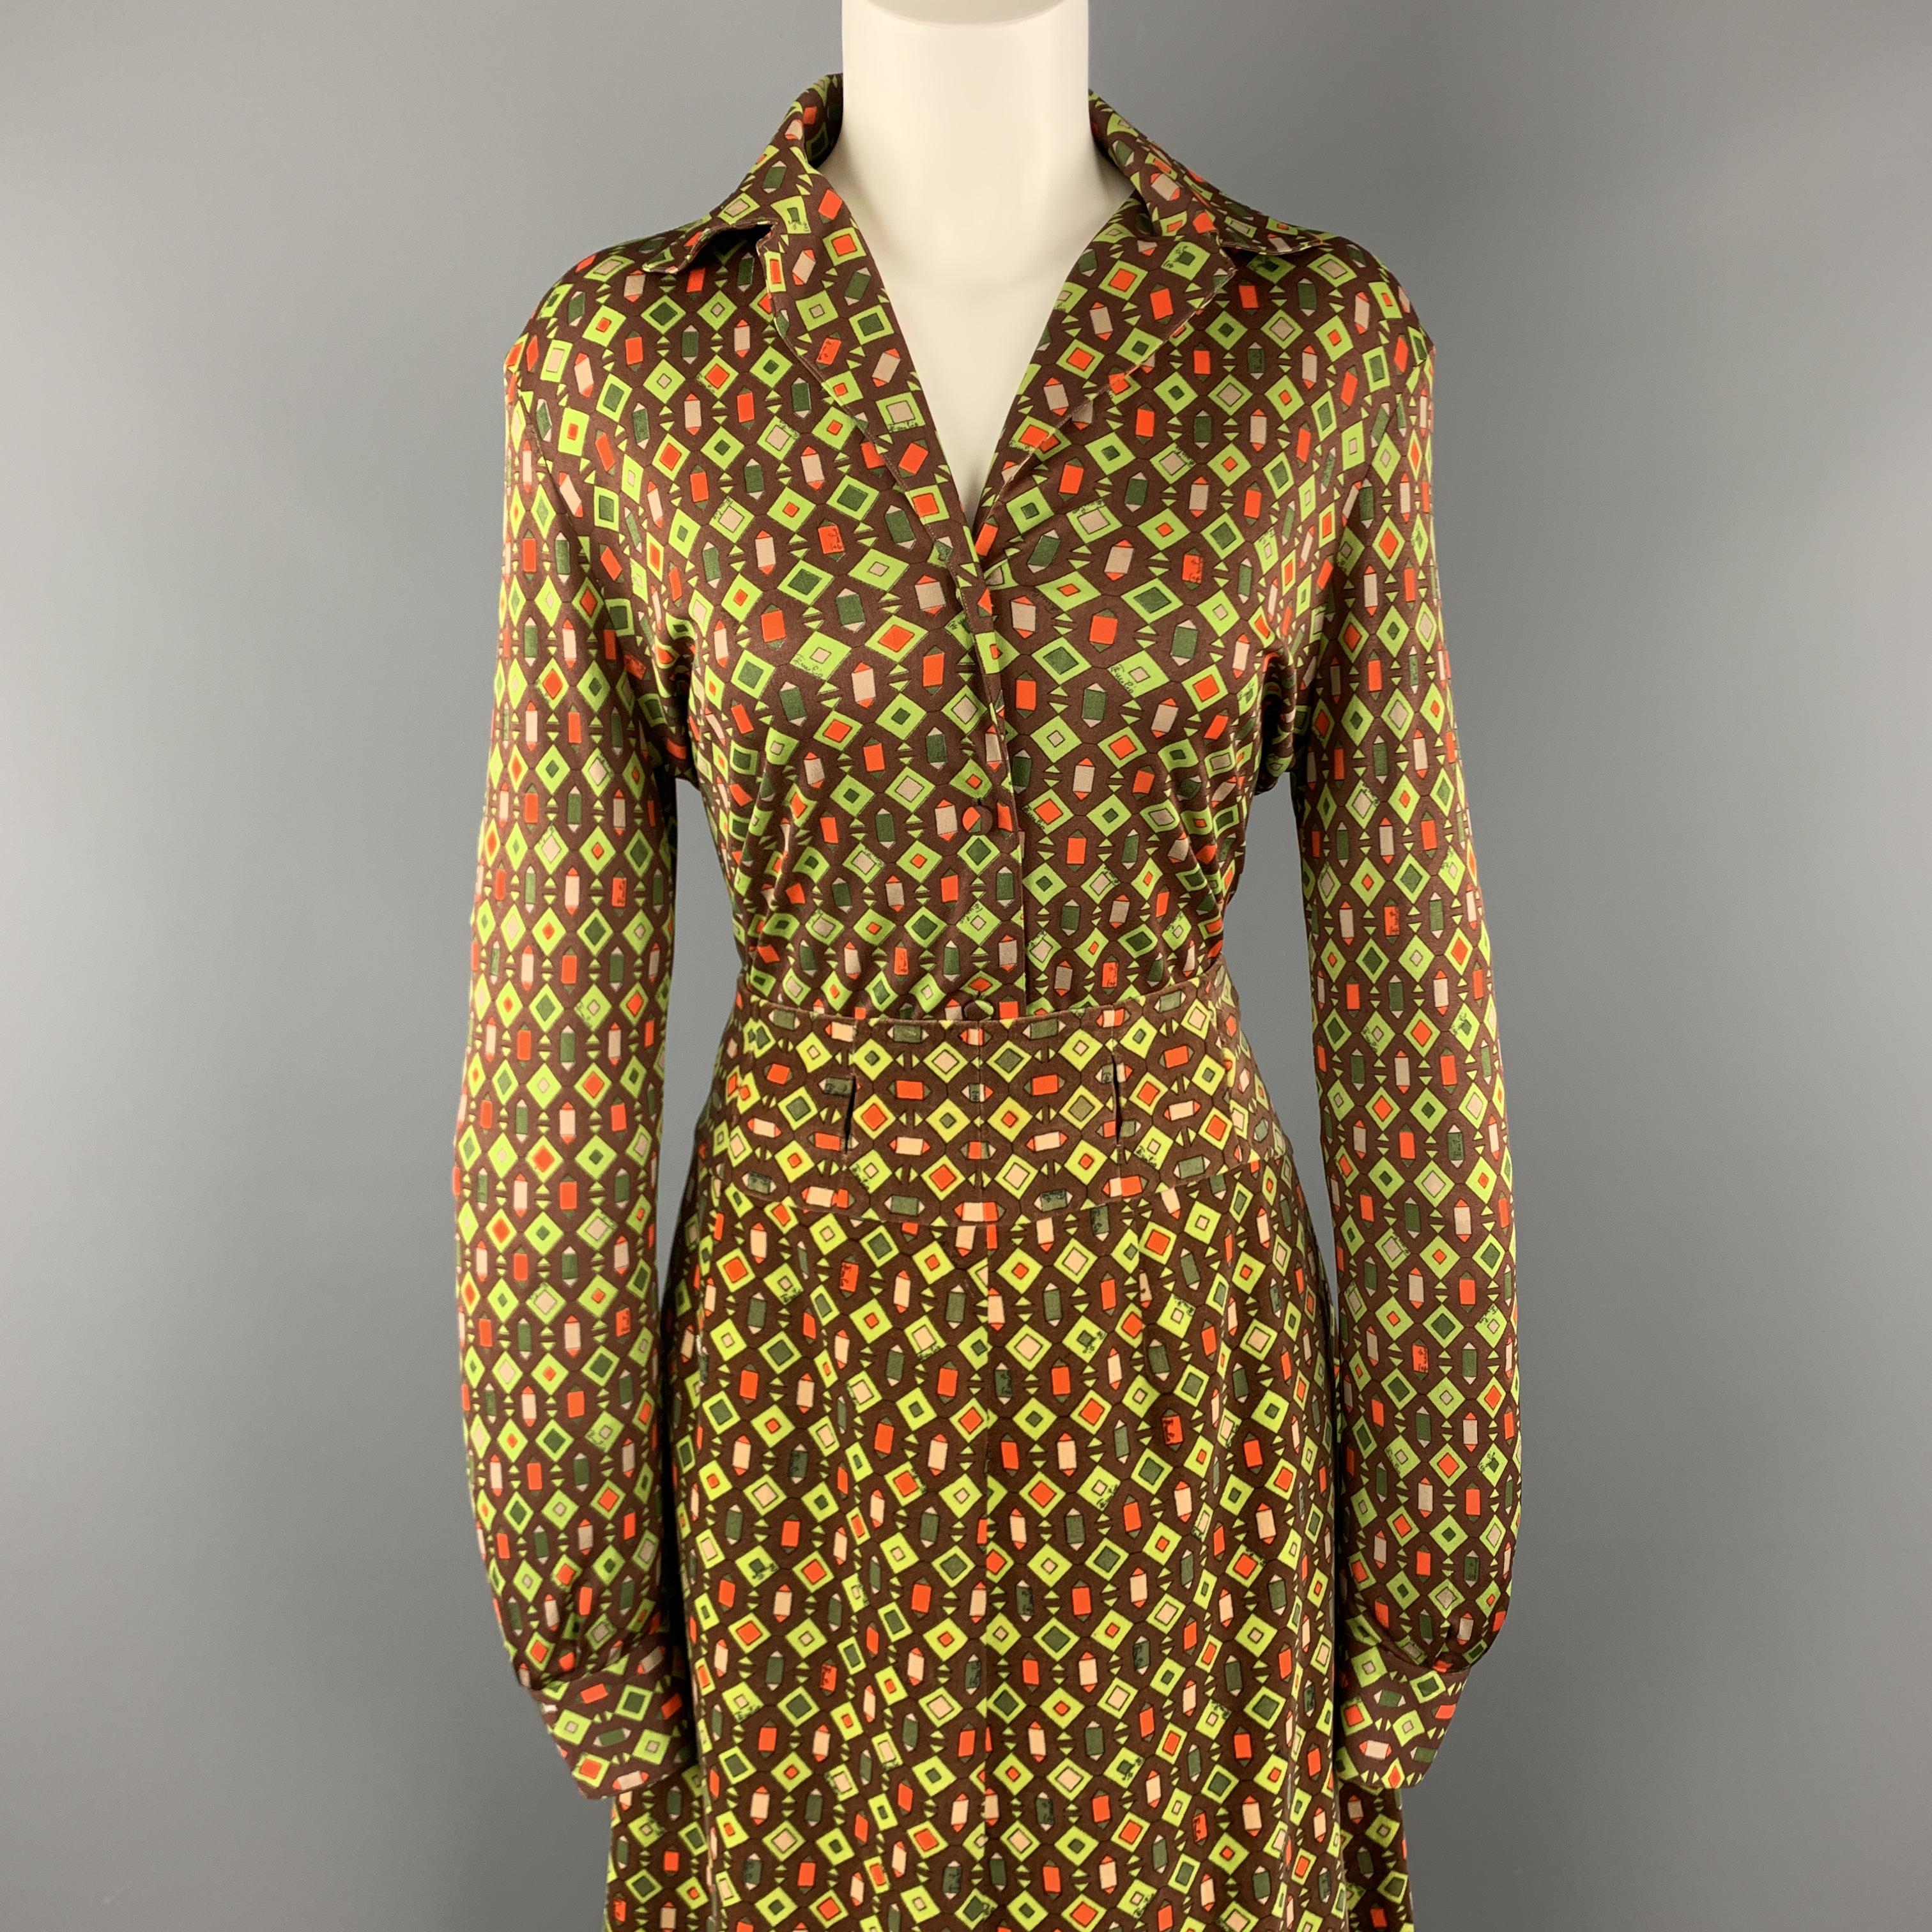 Vintage EMILIO PUCCI ensemble comes in a green and brown geometric print and includes a silk blend long sleeve blouse and matching full length velvet A line skirt with belt slits. Made in Italy.

Very Good Pre-Owned Condition.
Marked: